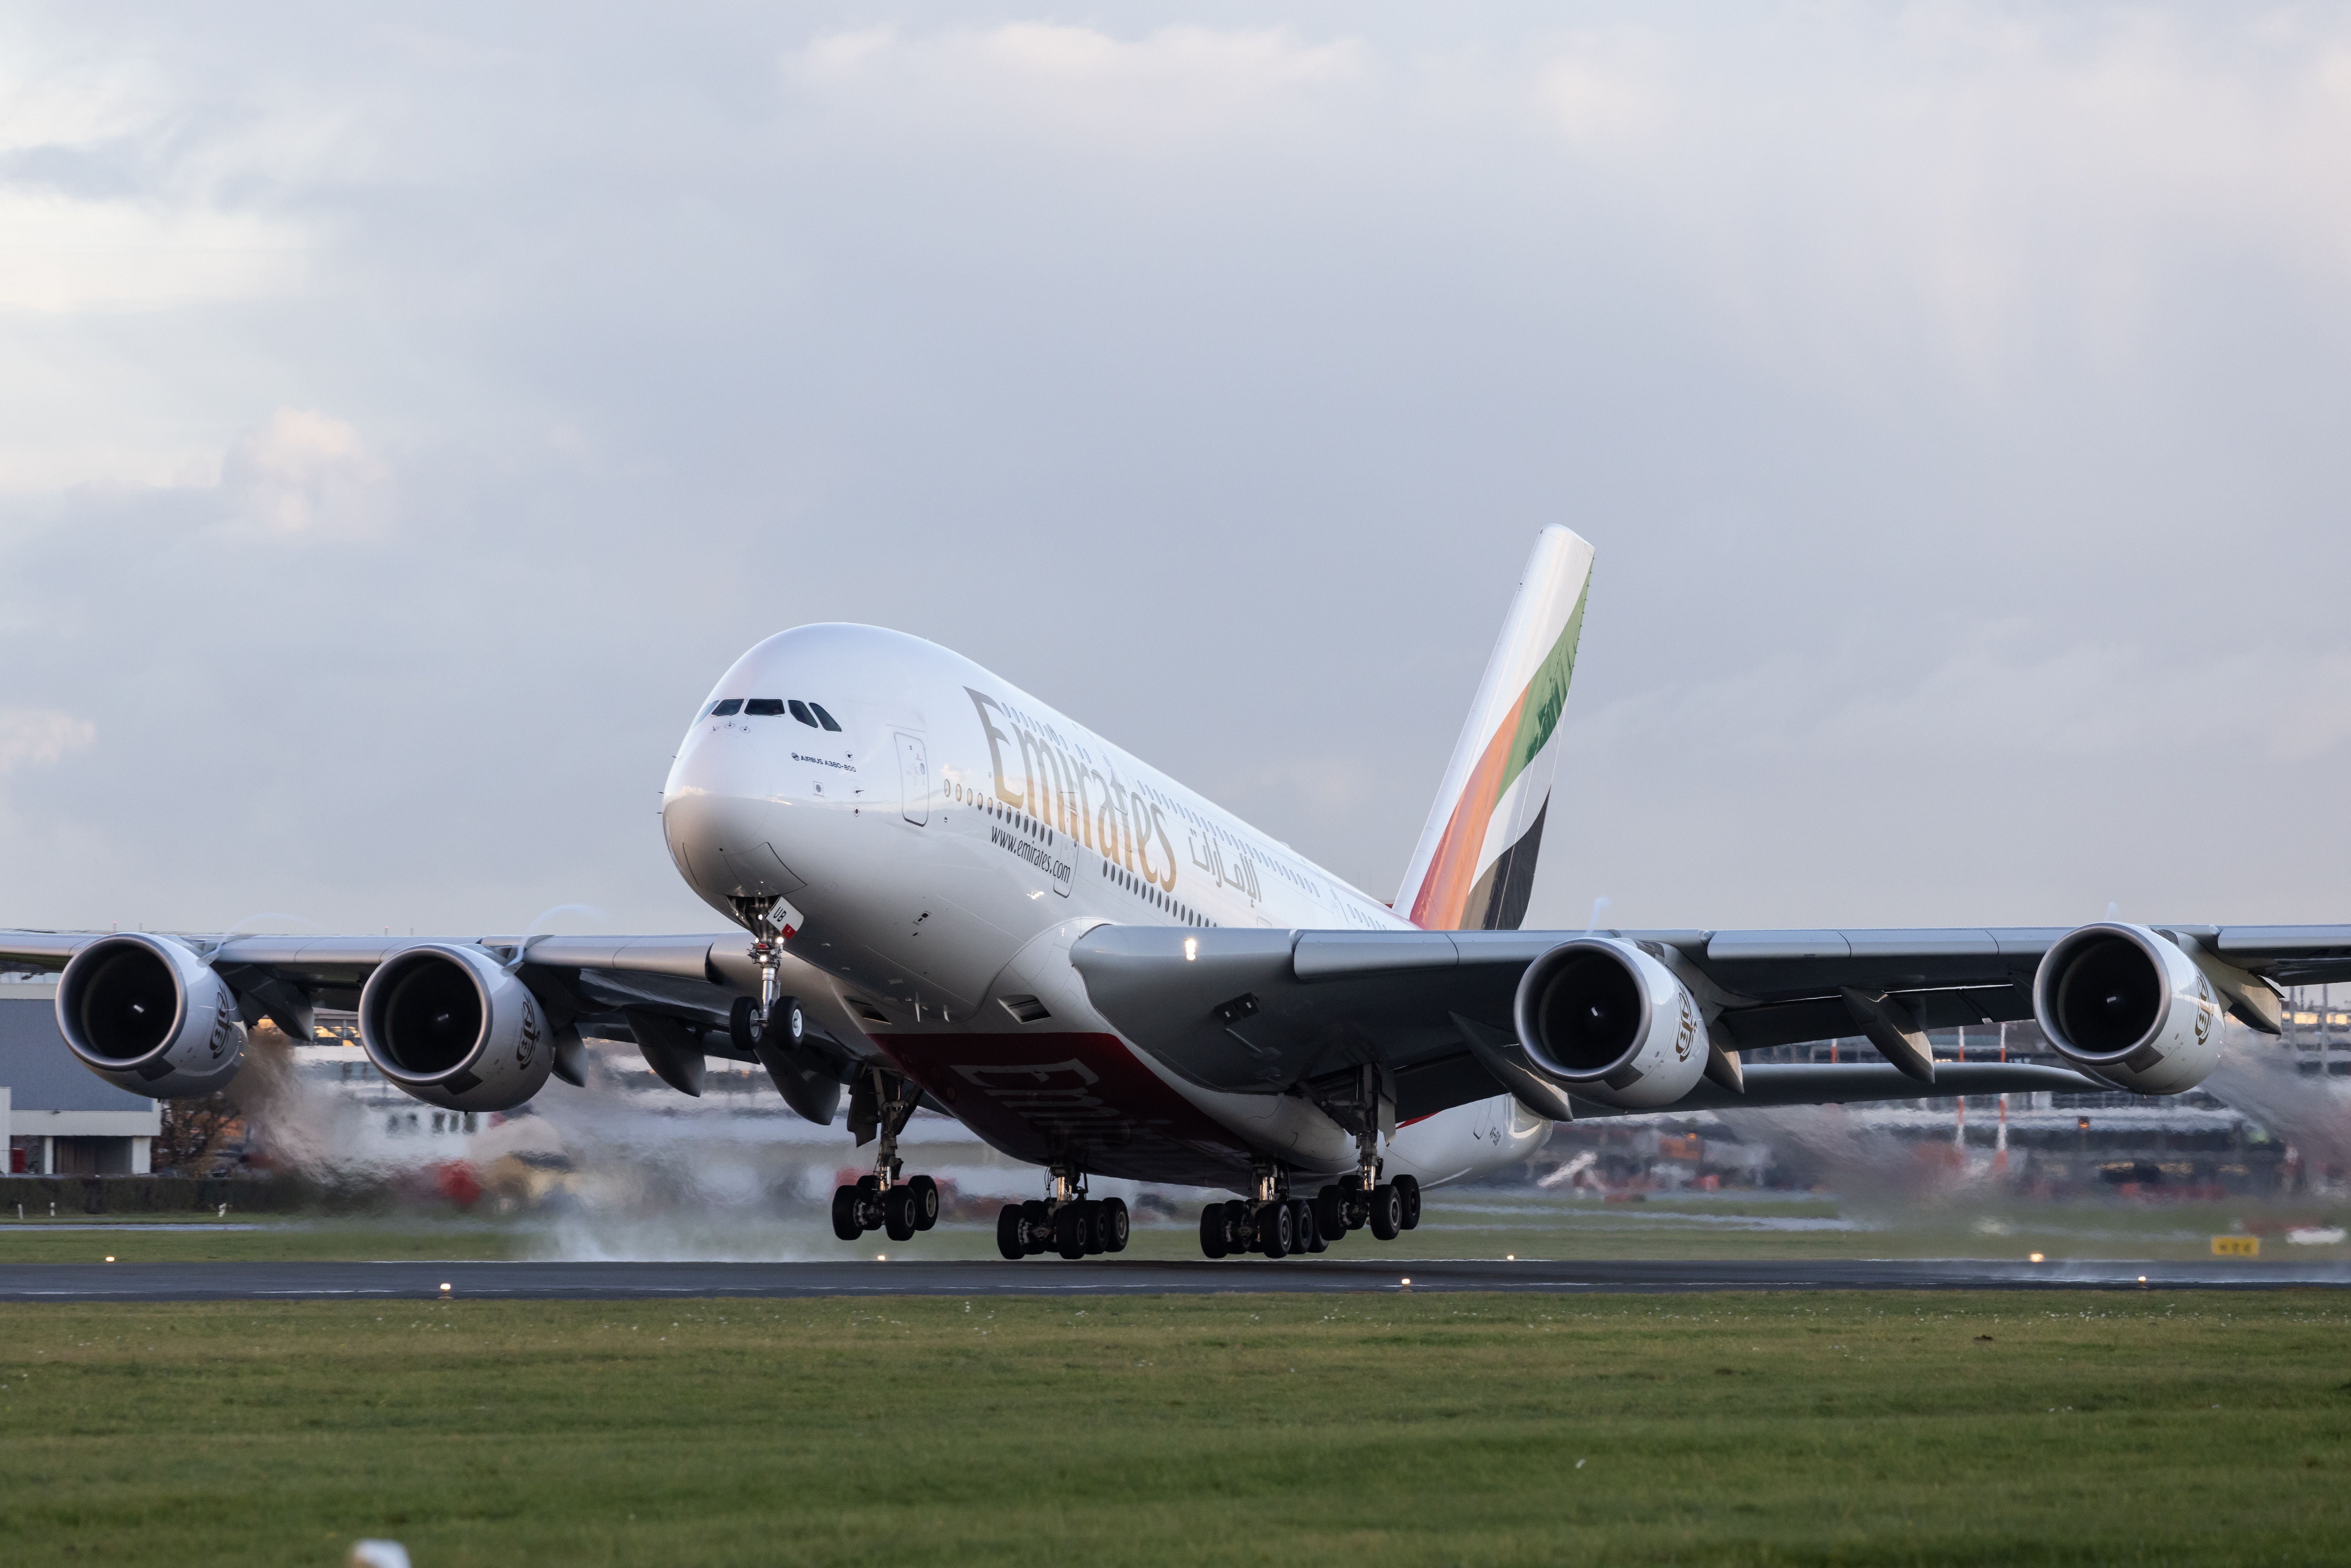 An Emirates Airbus A380 landing on a runway.